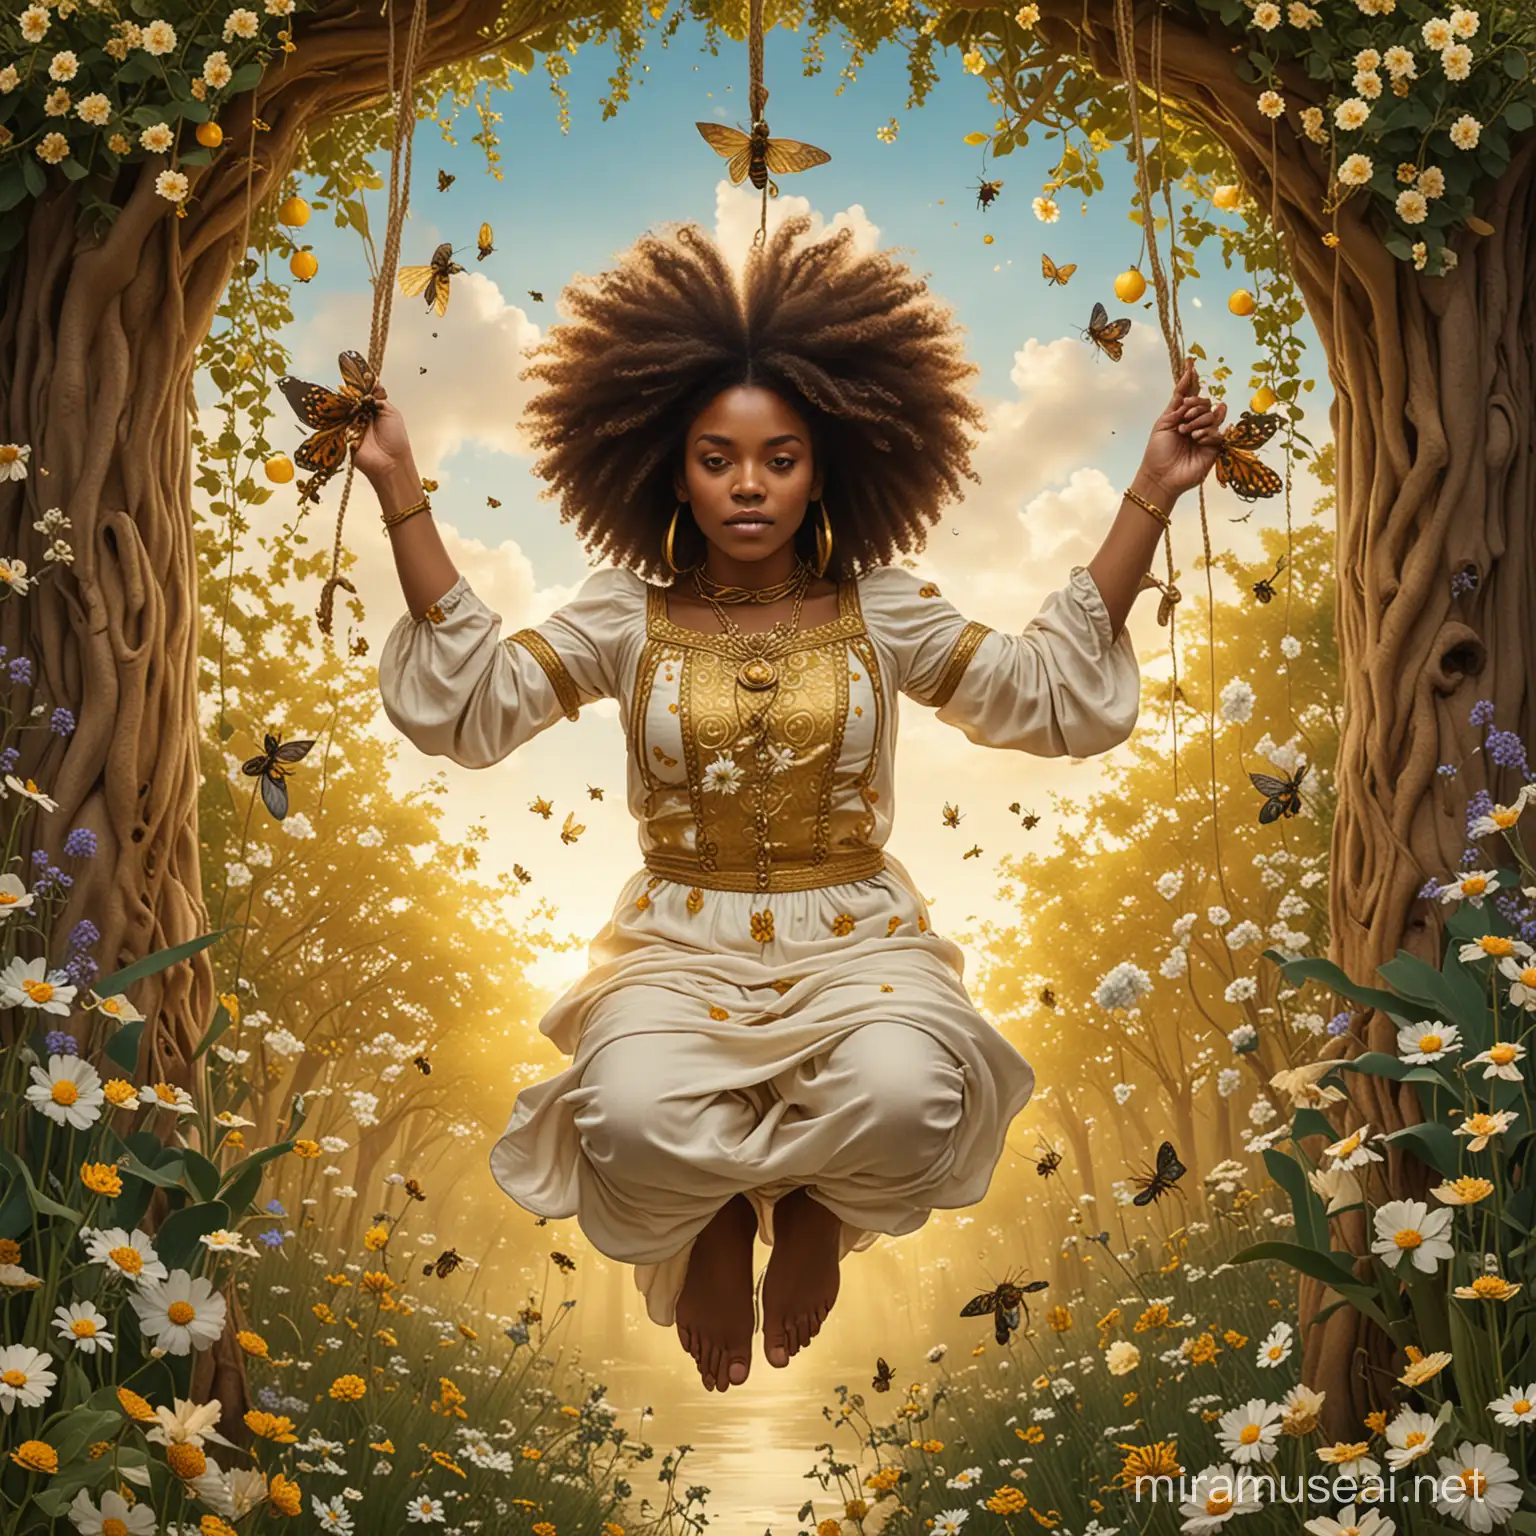 Create a tarot card that represents the hanged man, yet she is an Afro-Indigenous woman hanging upside-down, bound by her left foot. She is suspended by a piece of honeycom, with her arms are crossed behind her back. She has naturally curly hair and is dressed in gold and white with a enchanted garden full of honeybees